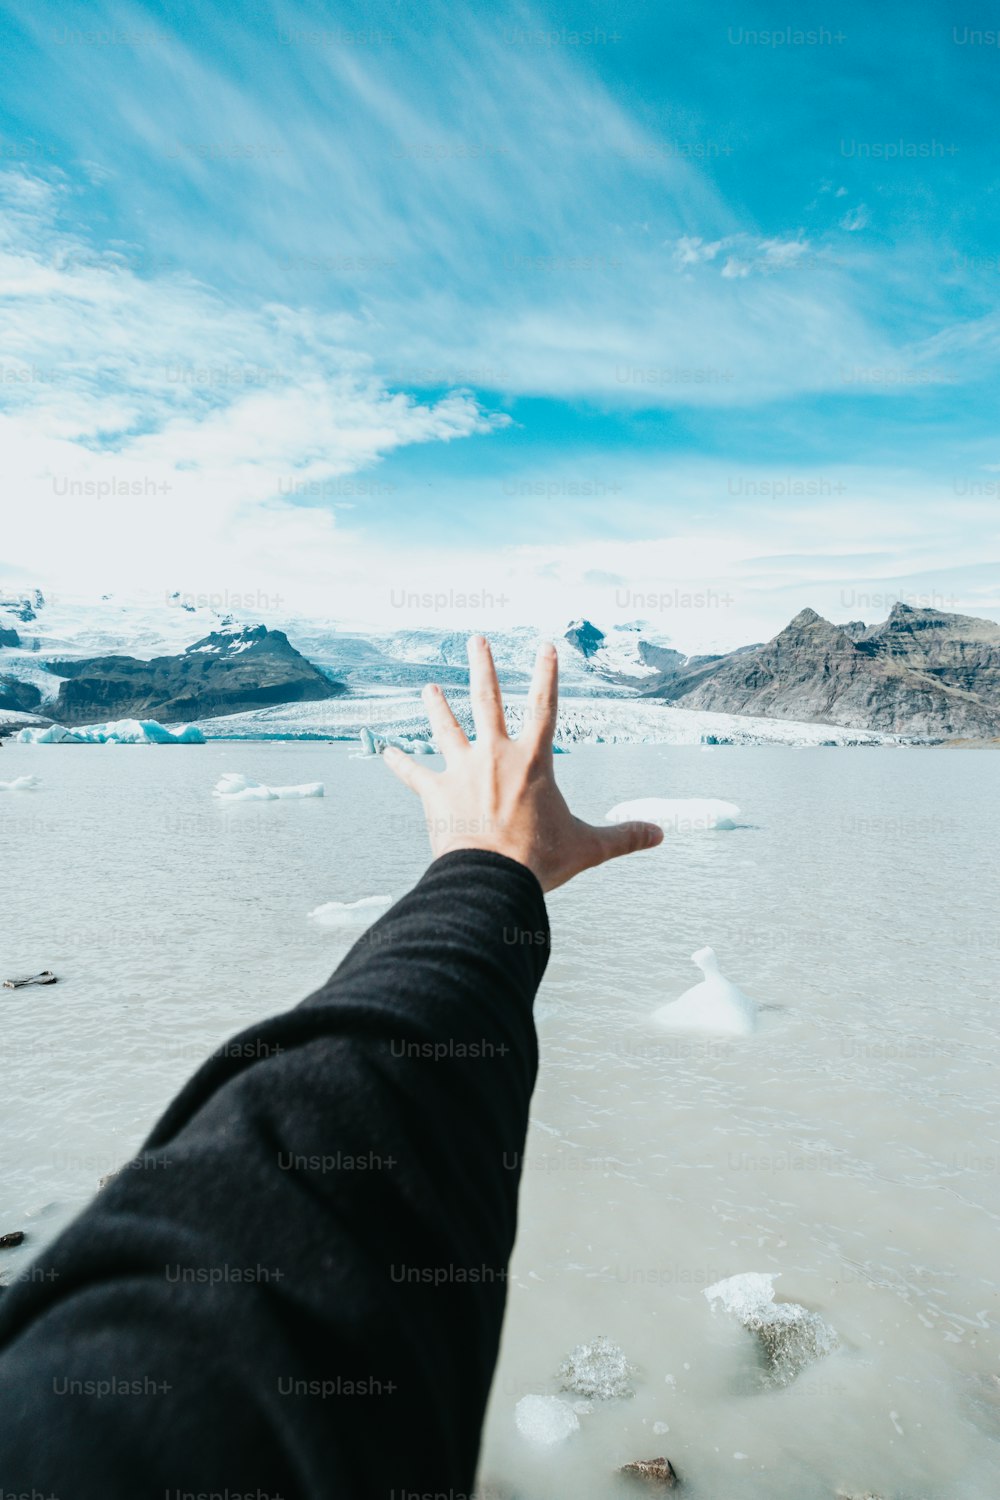 a person's hand reaching out towards a glacier